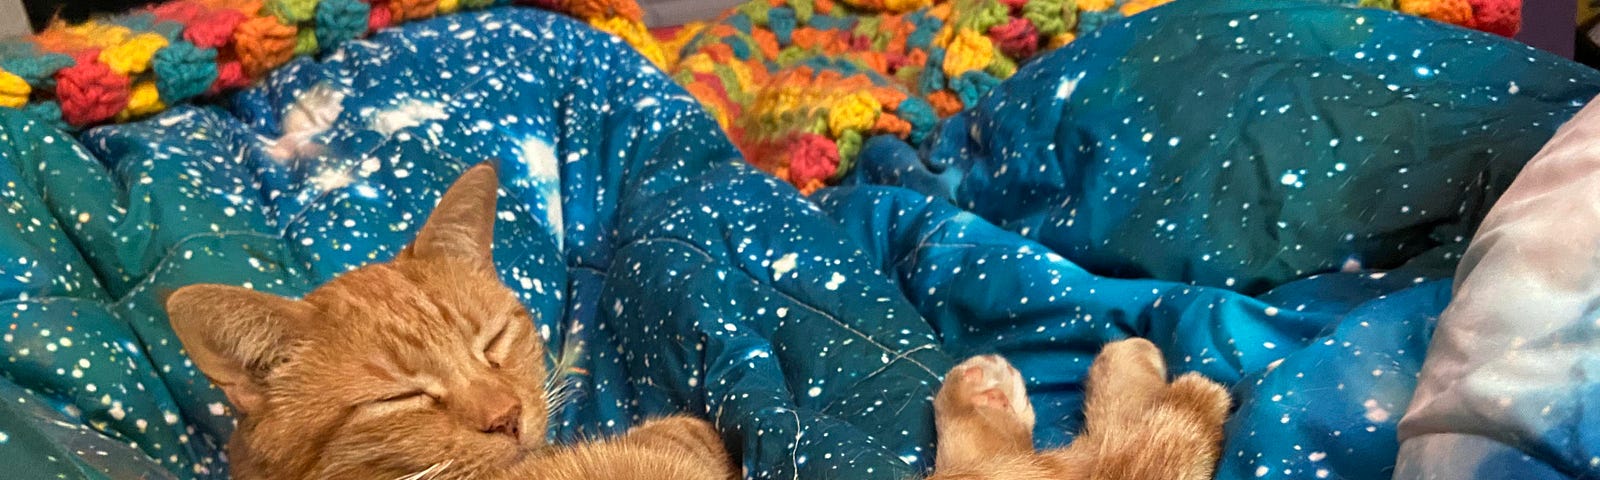 Grandkitty orange tabby Bouy sleeping peacefully on a colorful quilt